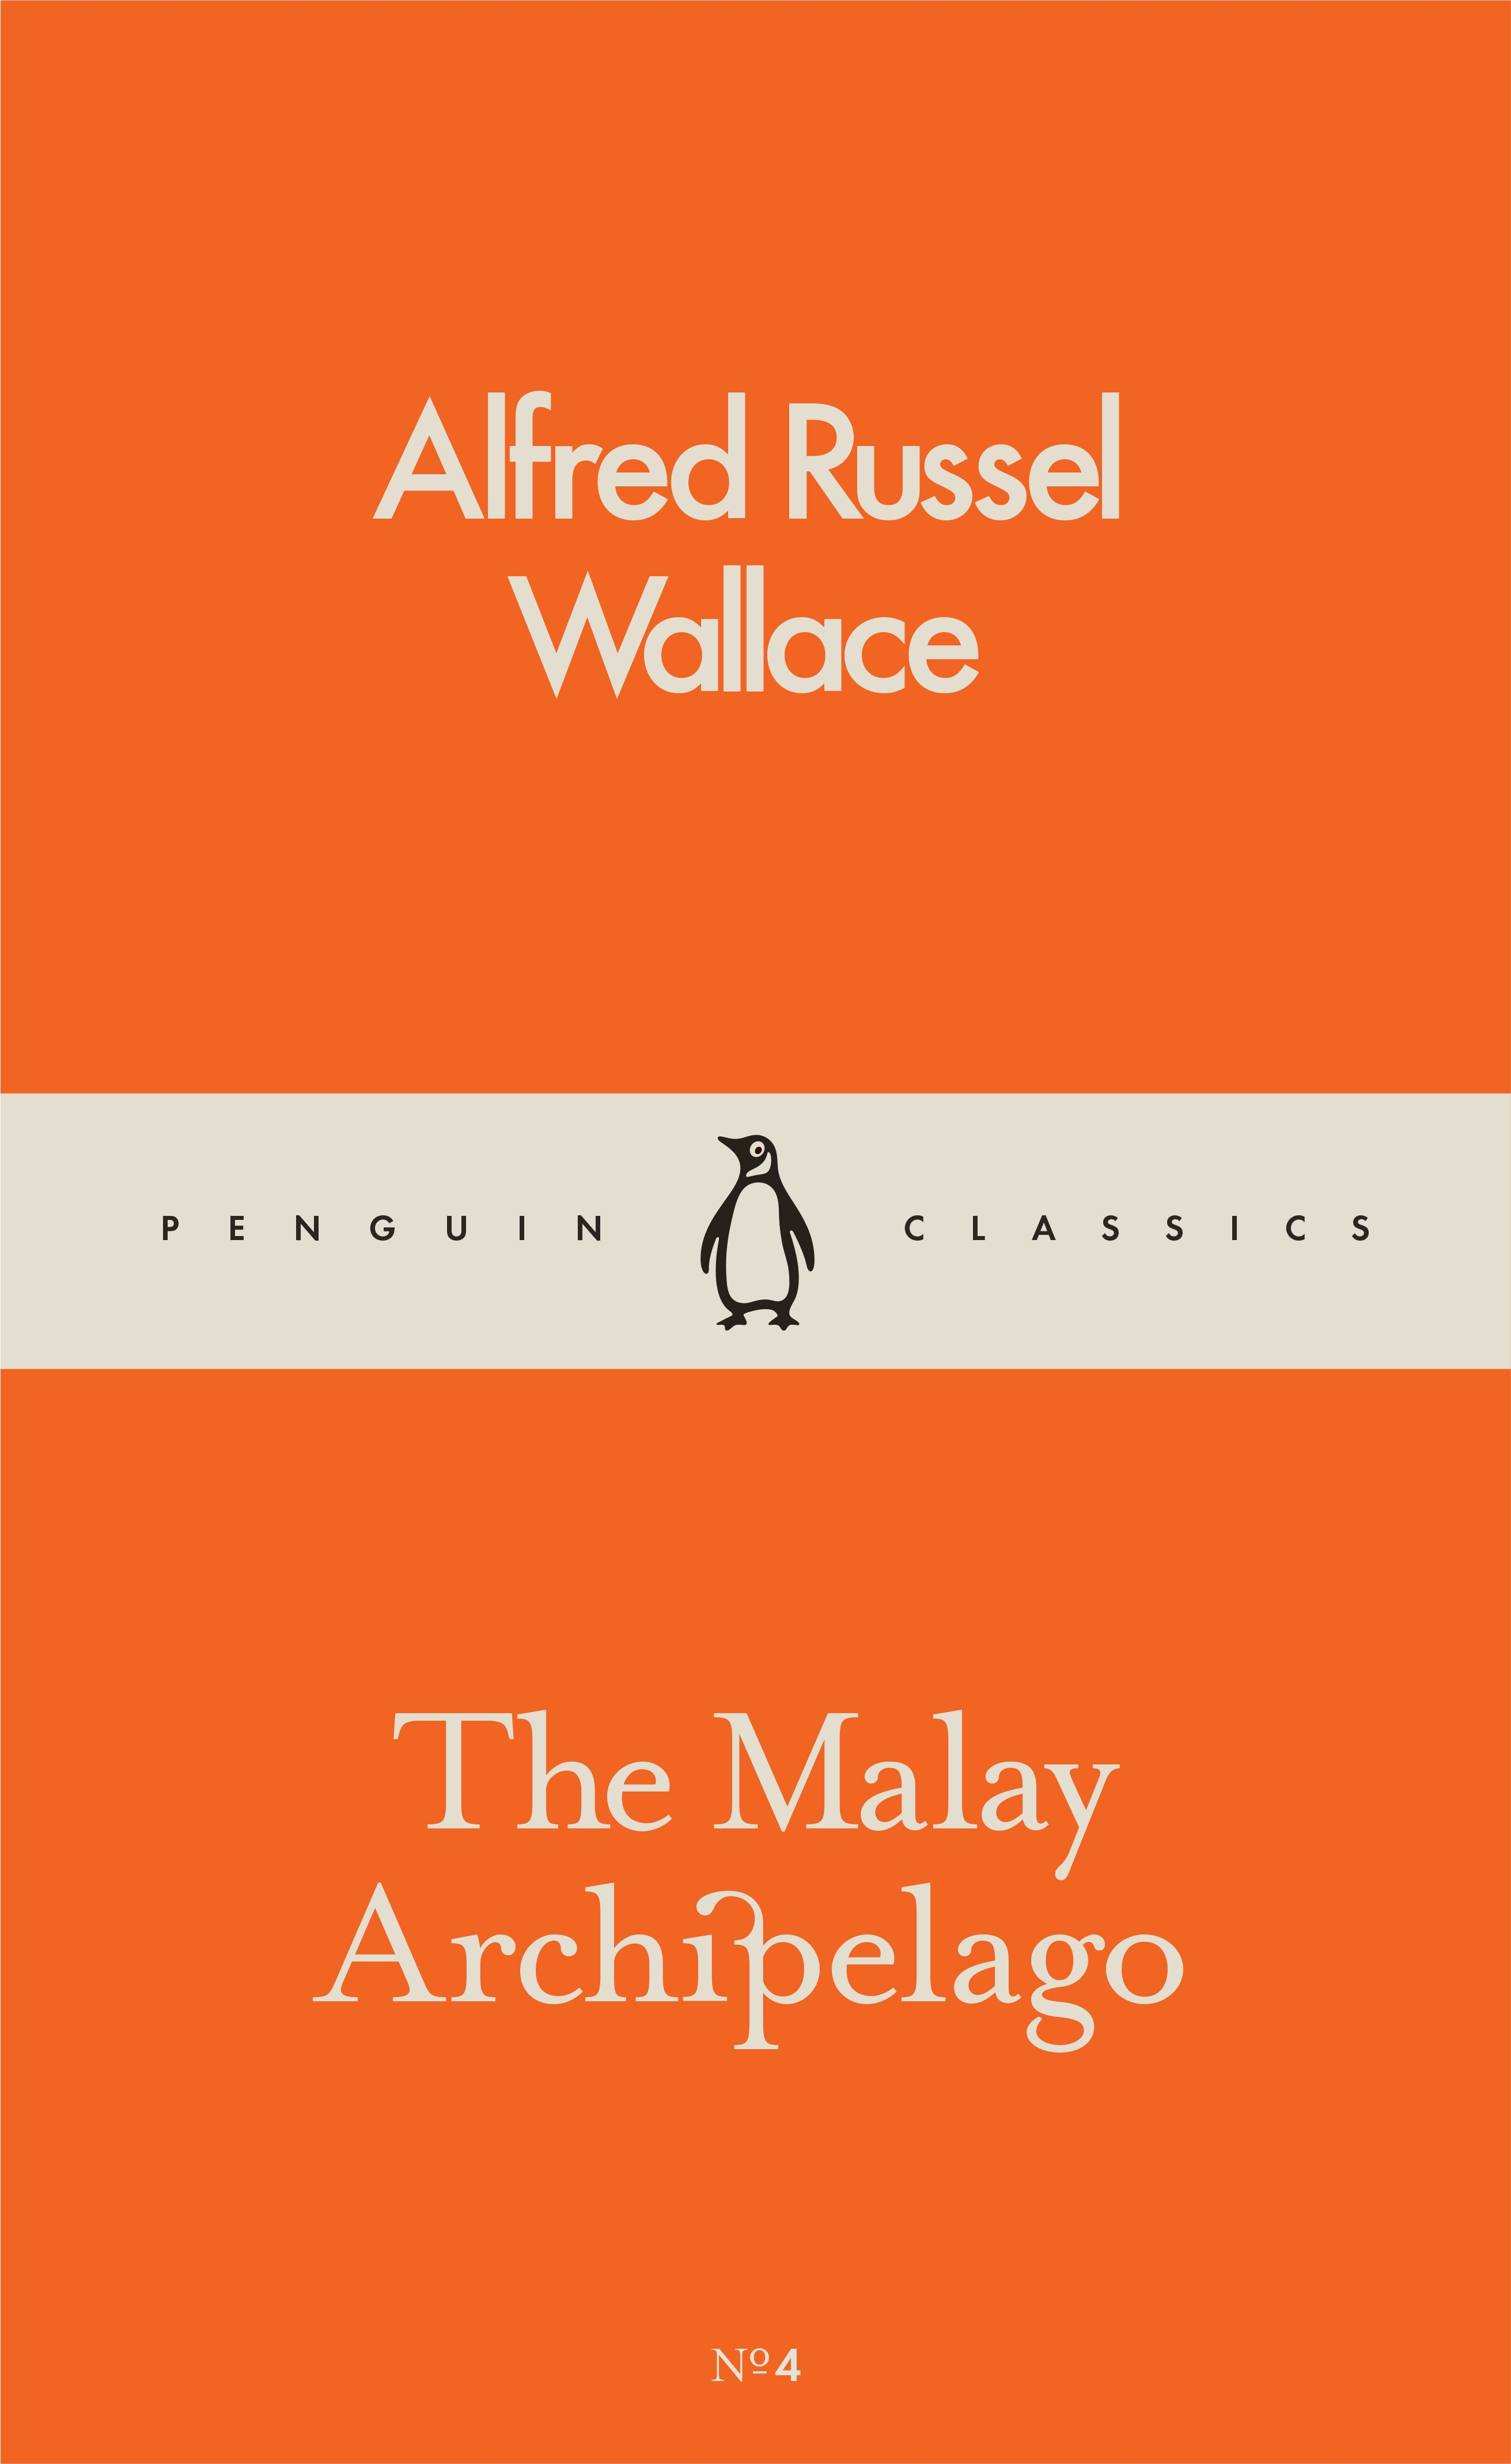 alfred russel wallace and malay archapeliago